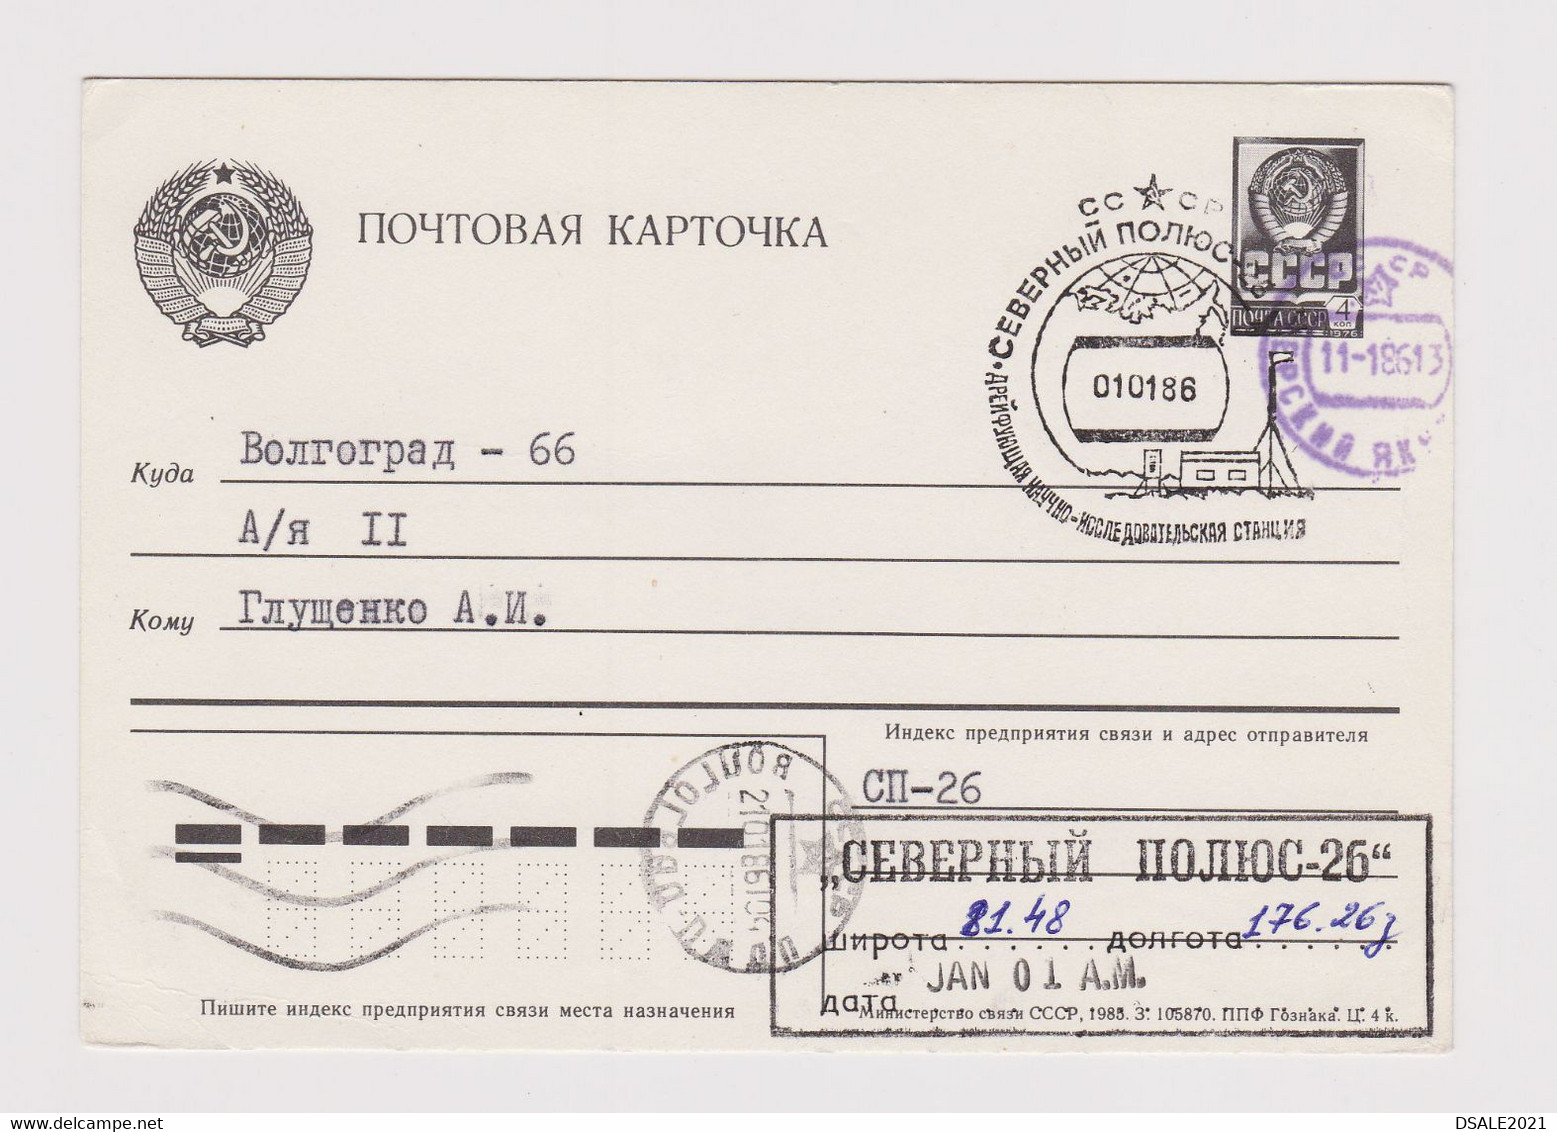 NP North Pole 1986 Soviet Russian USSR Staffed Drifting Ice Station North Pole-26 Stationery Card PSC (49132) - Stations Scientifiques & Stations Dérivantes Arctiques